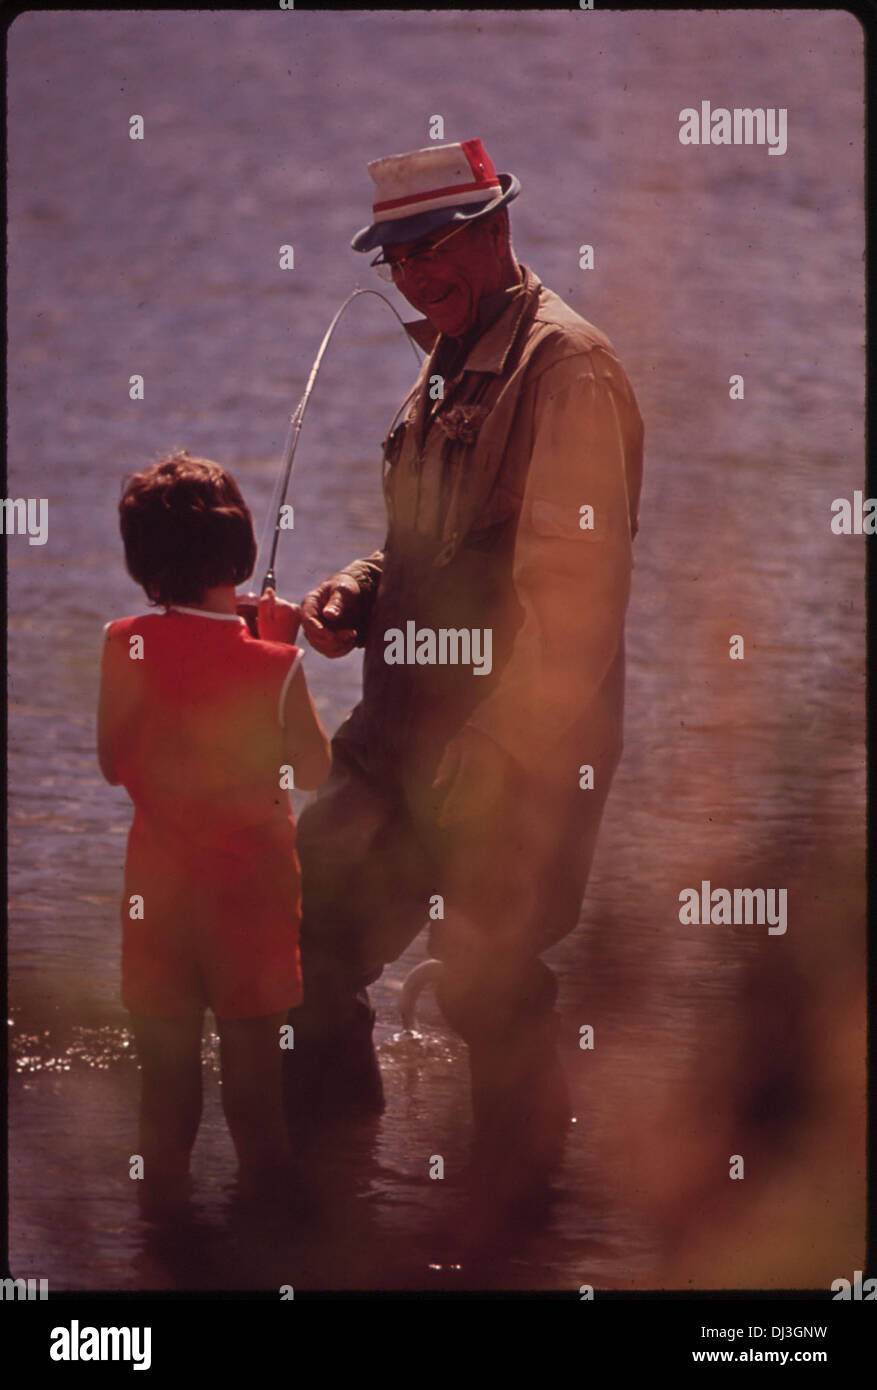 SHANA IS TAUGHT TO FISH BY HER GRANDFATHER AT MAN-MADE MIRAMONTE LAKE 693 Stock Photo